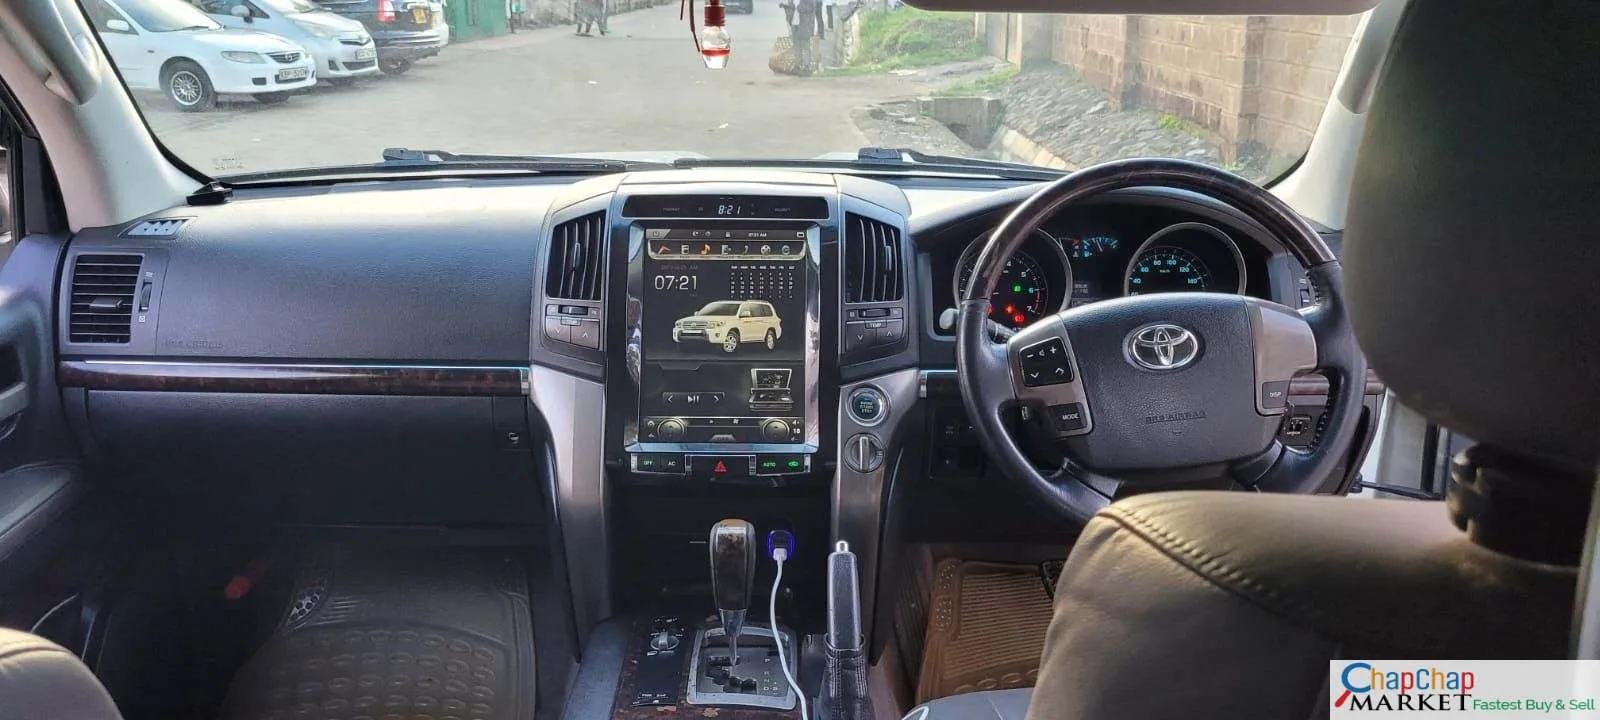 Toyota Land cruiser V8 200 series KDE QUICKEST SALE ONLY TRADE IN OK EXCLUSIVE v8 for Sale in Kenya hire purchase installments